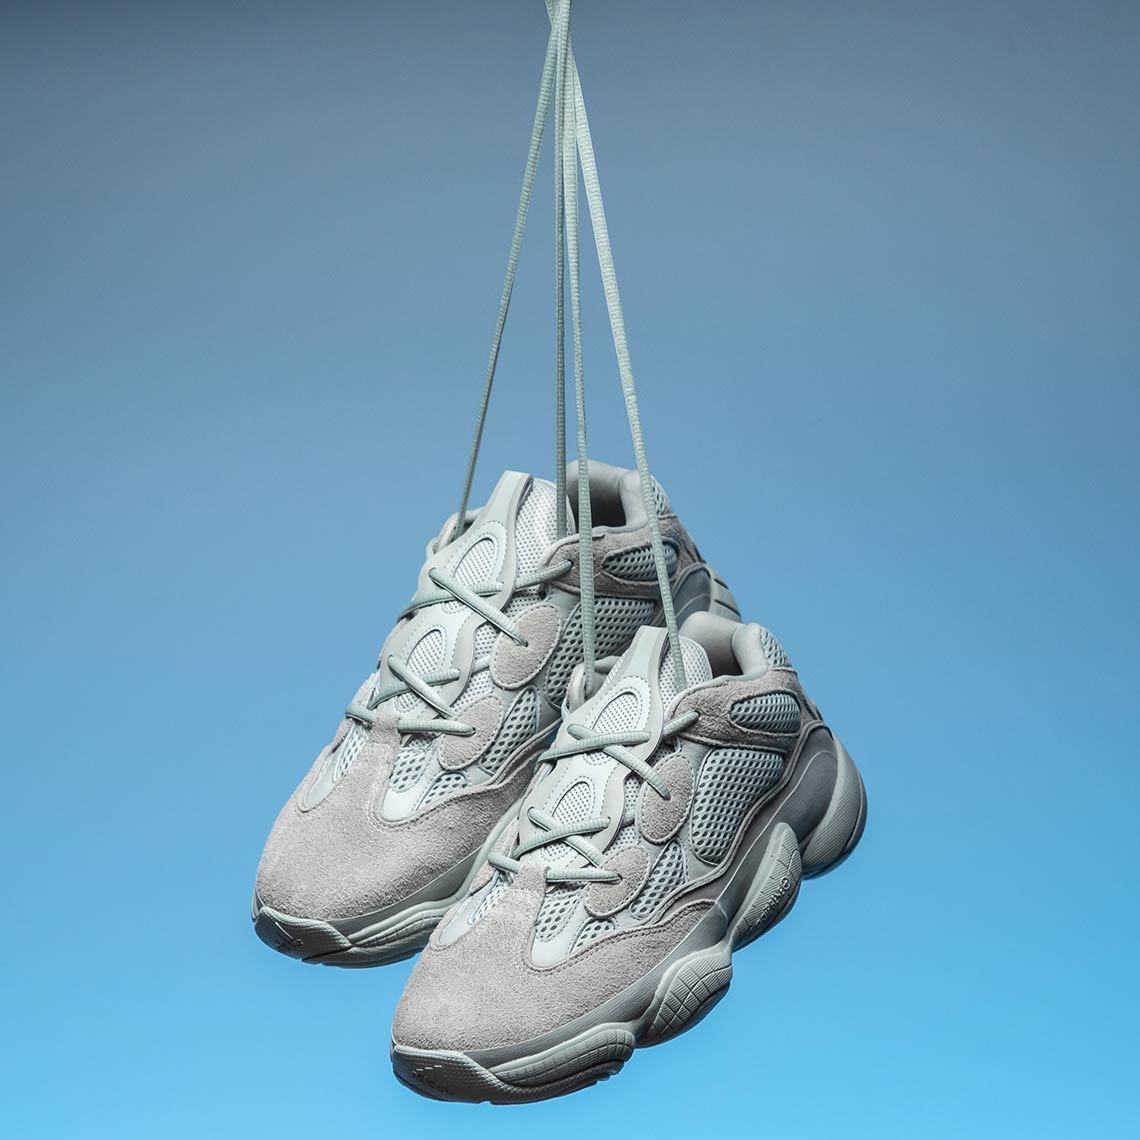 First Look At The Adidas Yeezy 500’s In ‘Salt’